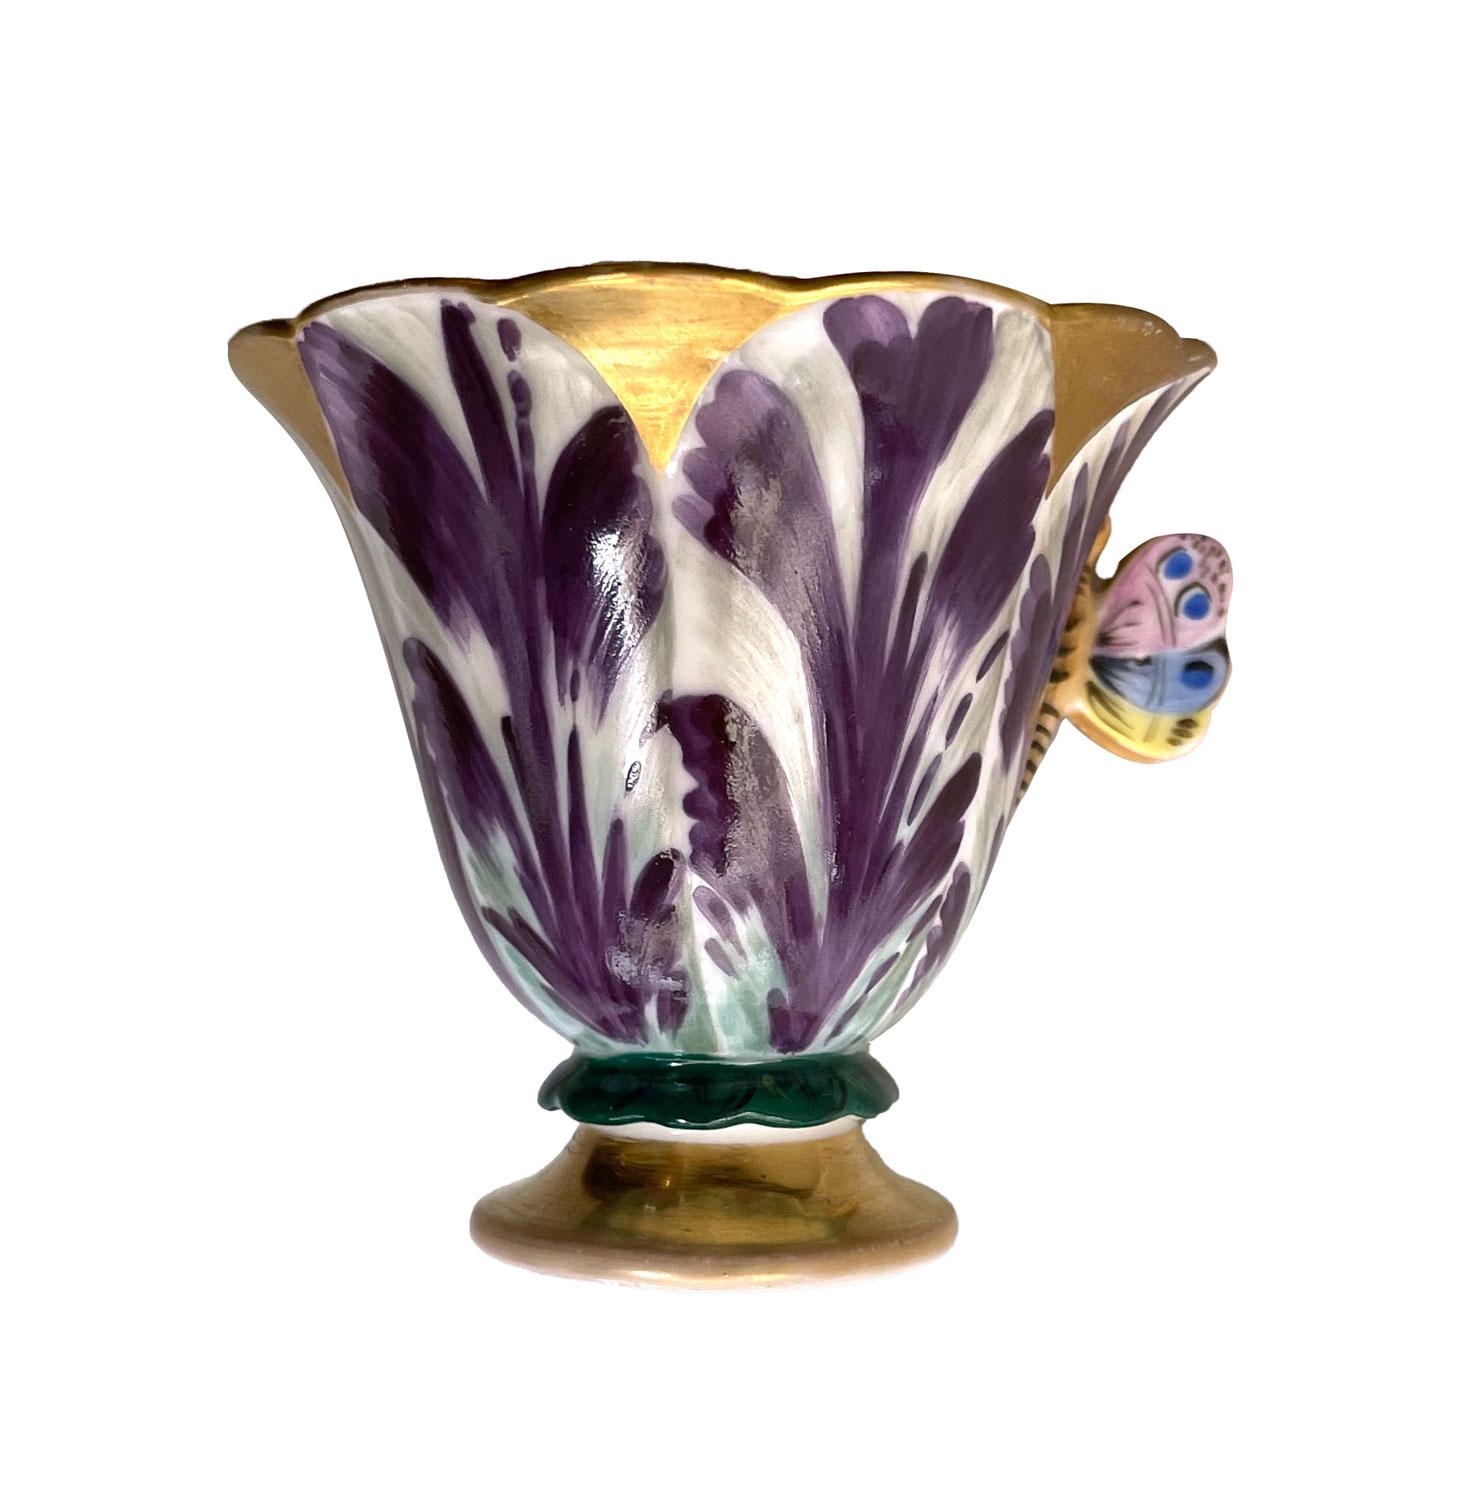 Tulip-shaped cup with its saucer in Old Paris Porcelain. Hand-painted pieces with lovely purple and white shades, in the shape of a tulip flower. Very delicate piece with a butterfly-shaped handle, edges slightly scalloped, reminding a flower shape.